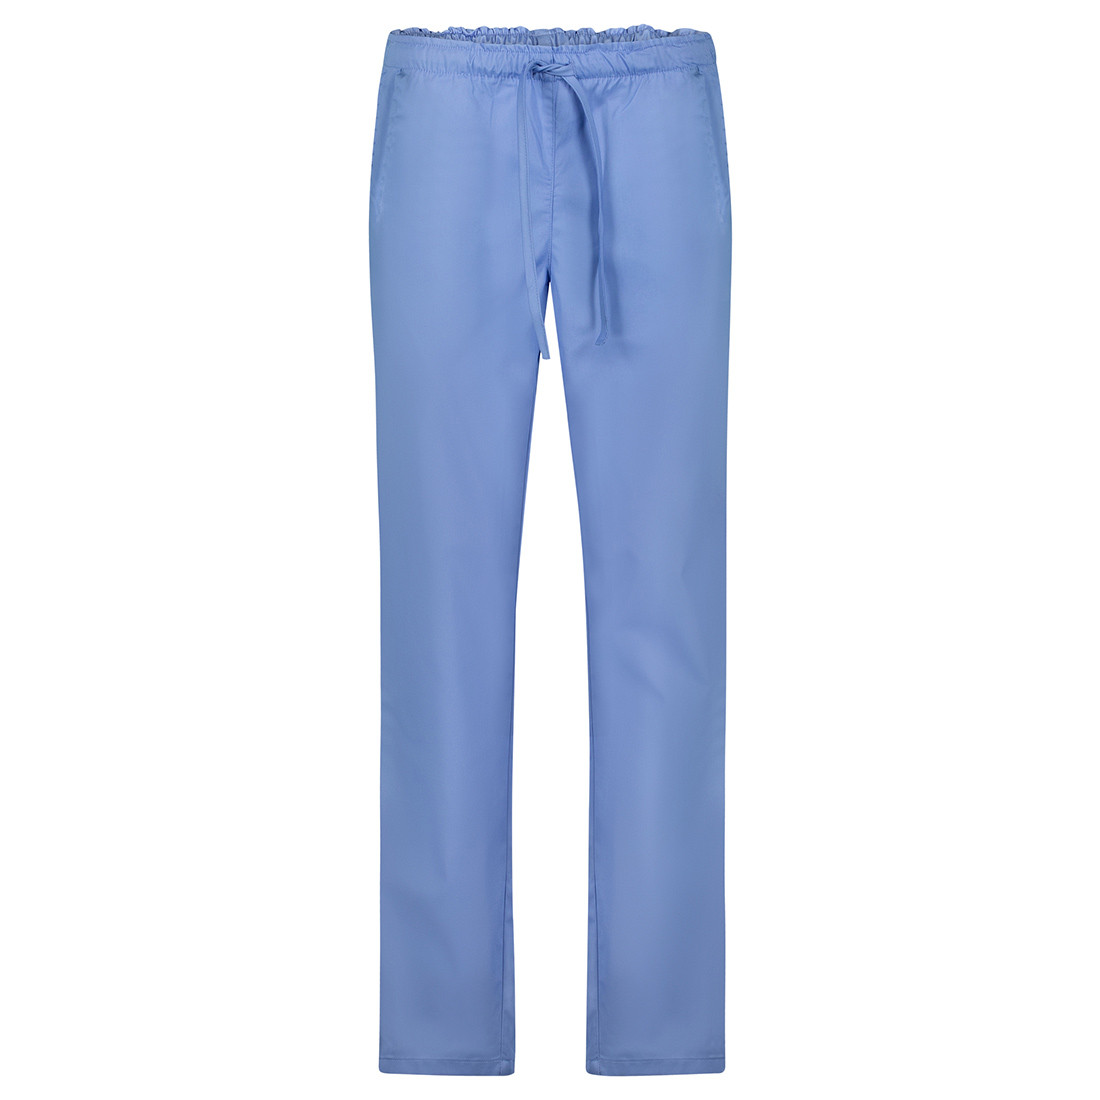 ALESSI Unisex medical trousers - Safetywear